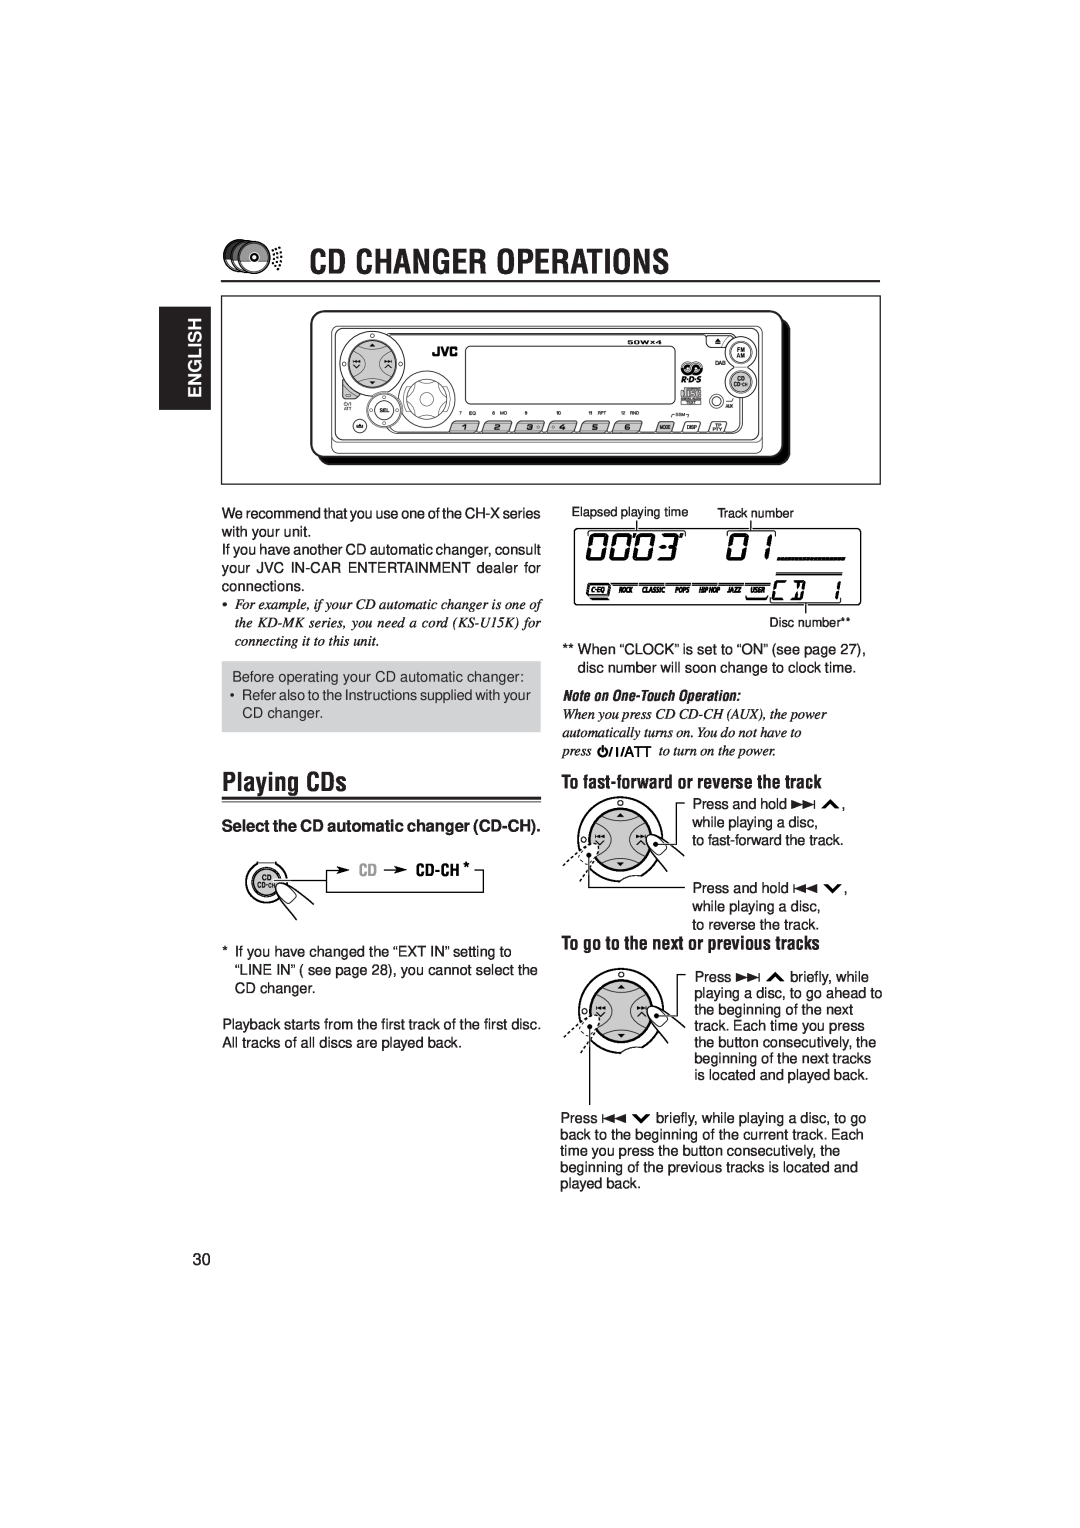 JVC KD-SX921R Cd Changer Operations, Playing CDs, English, To fast-forwardor reverse the track, Note on One-TouchOperation 